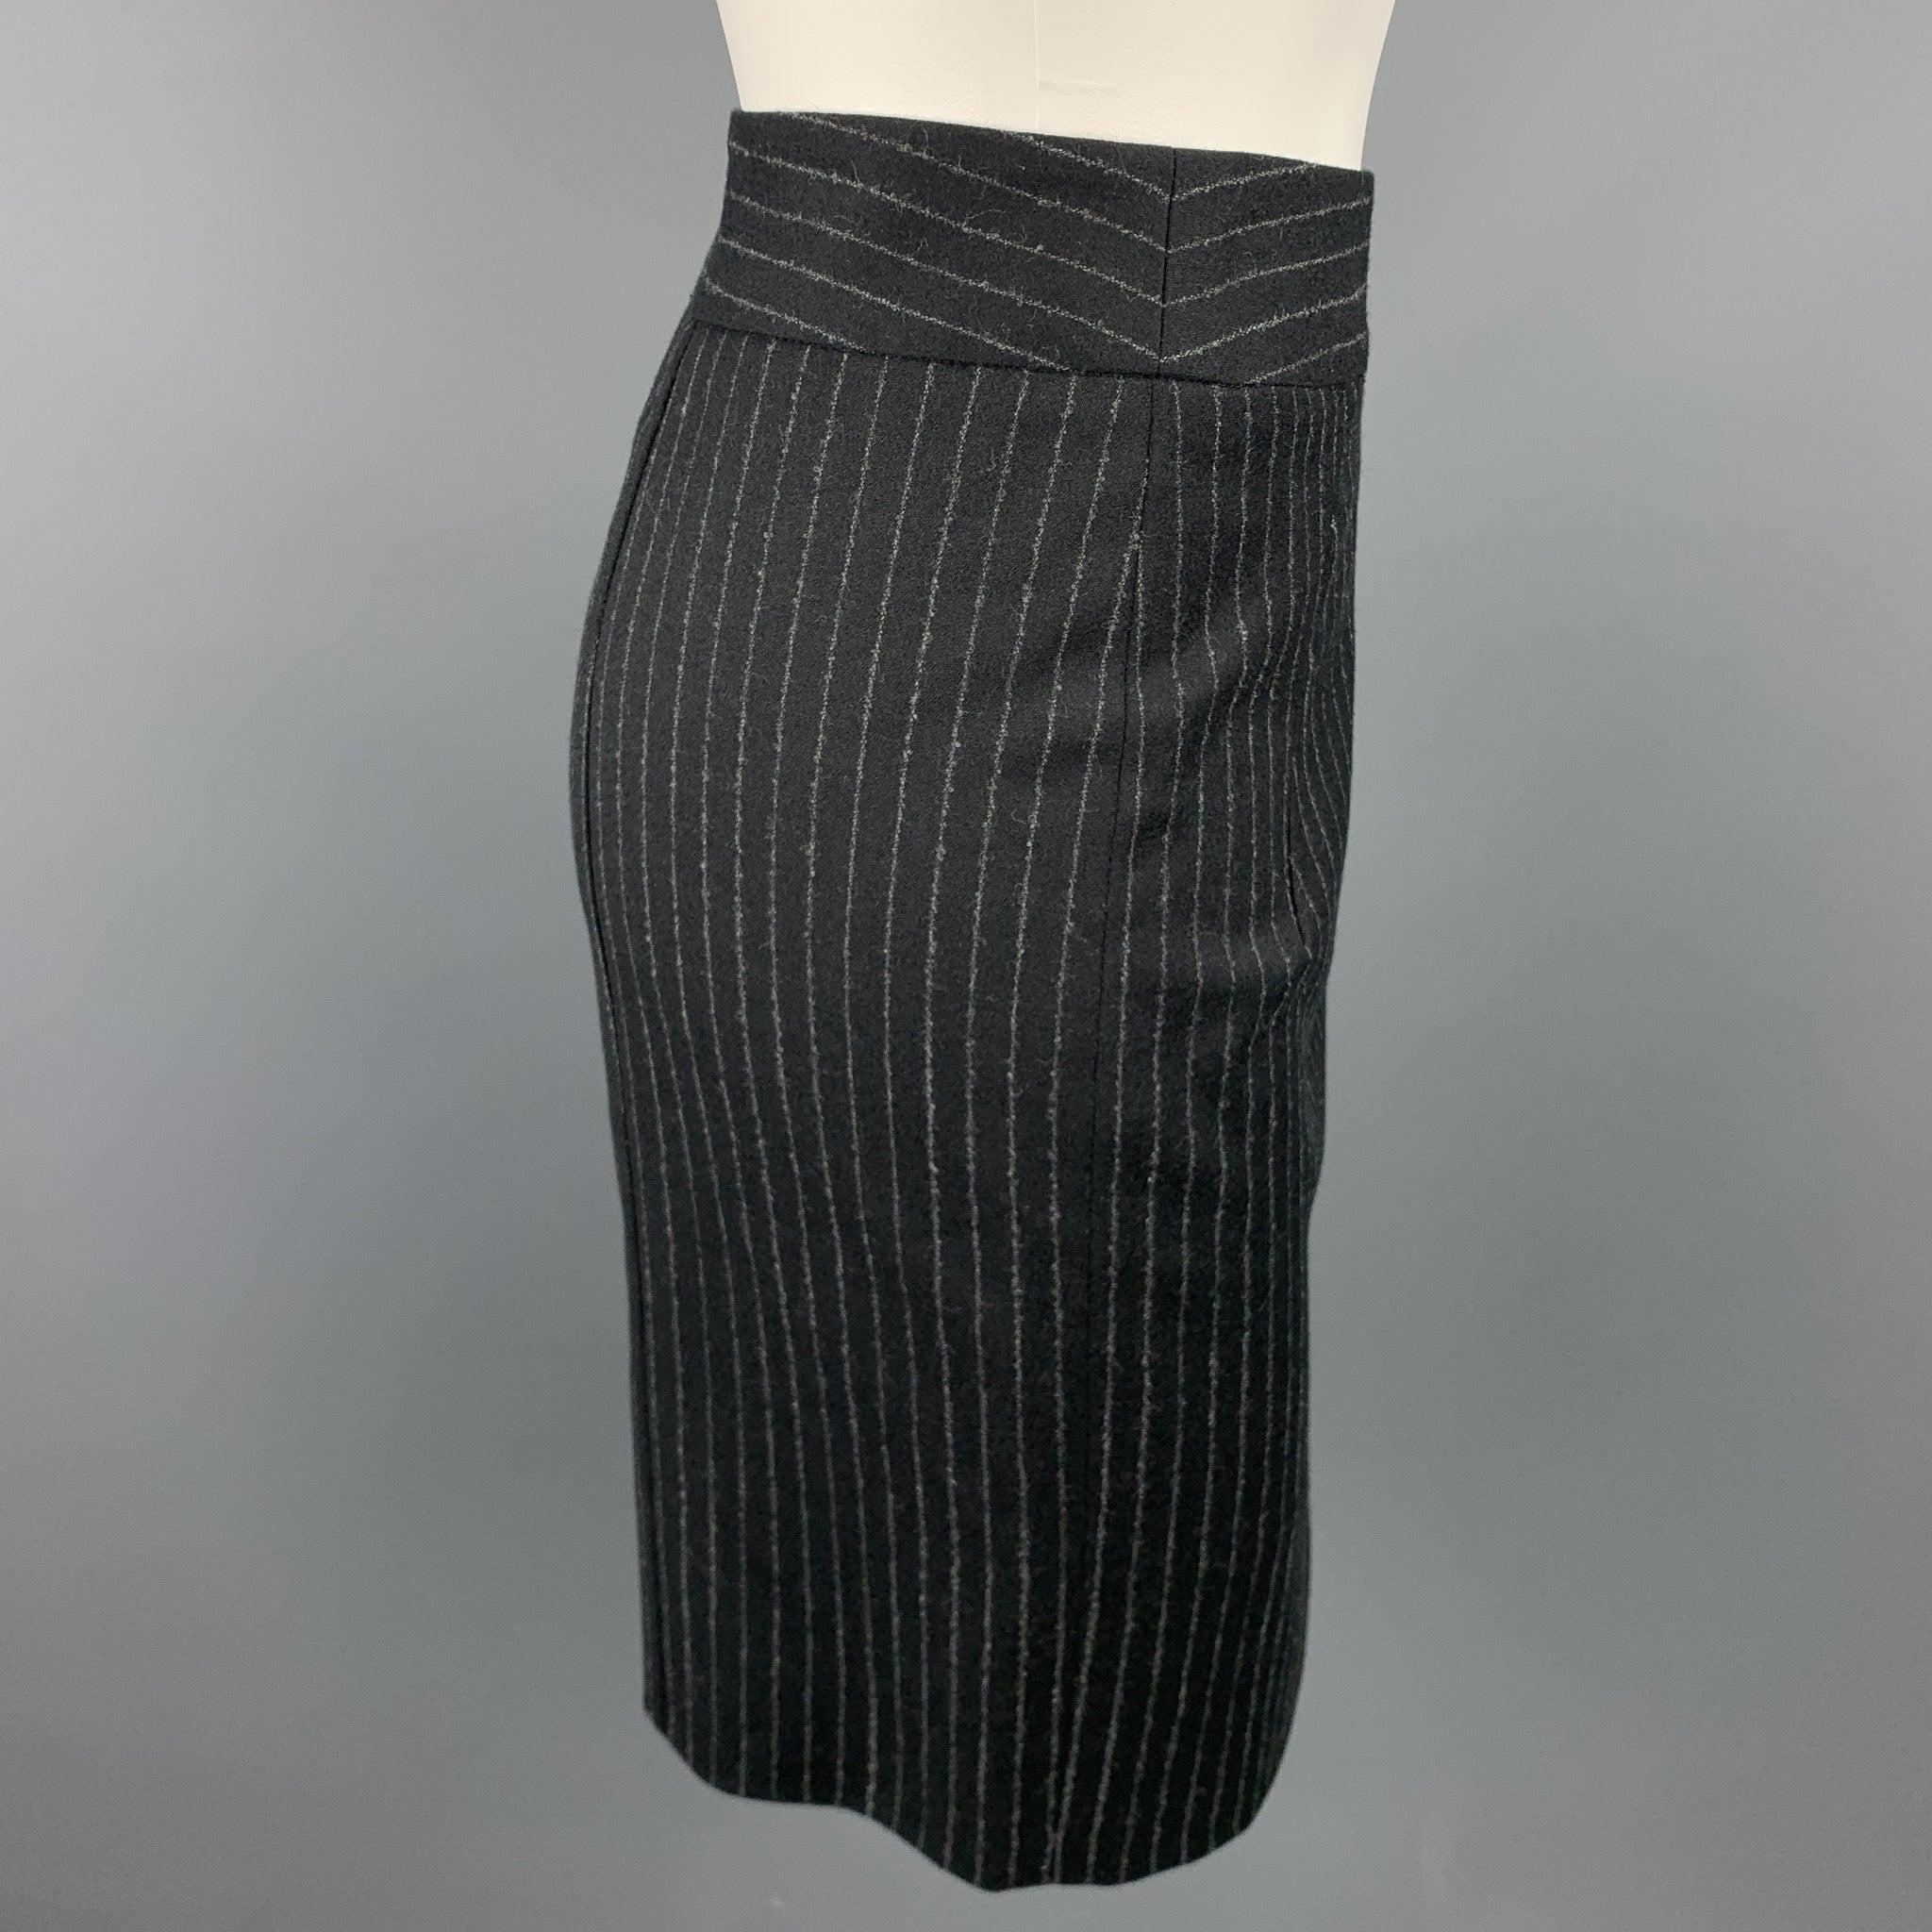 GIORGIO ARMANI skirt comes in a black & gray pinstripe with a full slip liner featuring a pencil style, back vent, and back zipper closure.
Excellent
Pre-Owned Condition. 

Marked:   Size not visible
 

Measurements: 
  Waist: 28 inches 
Hip: 36